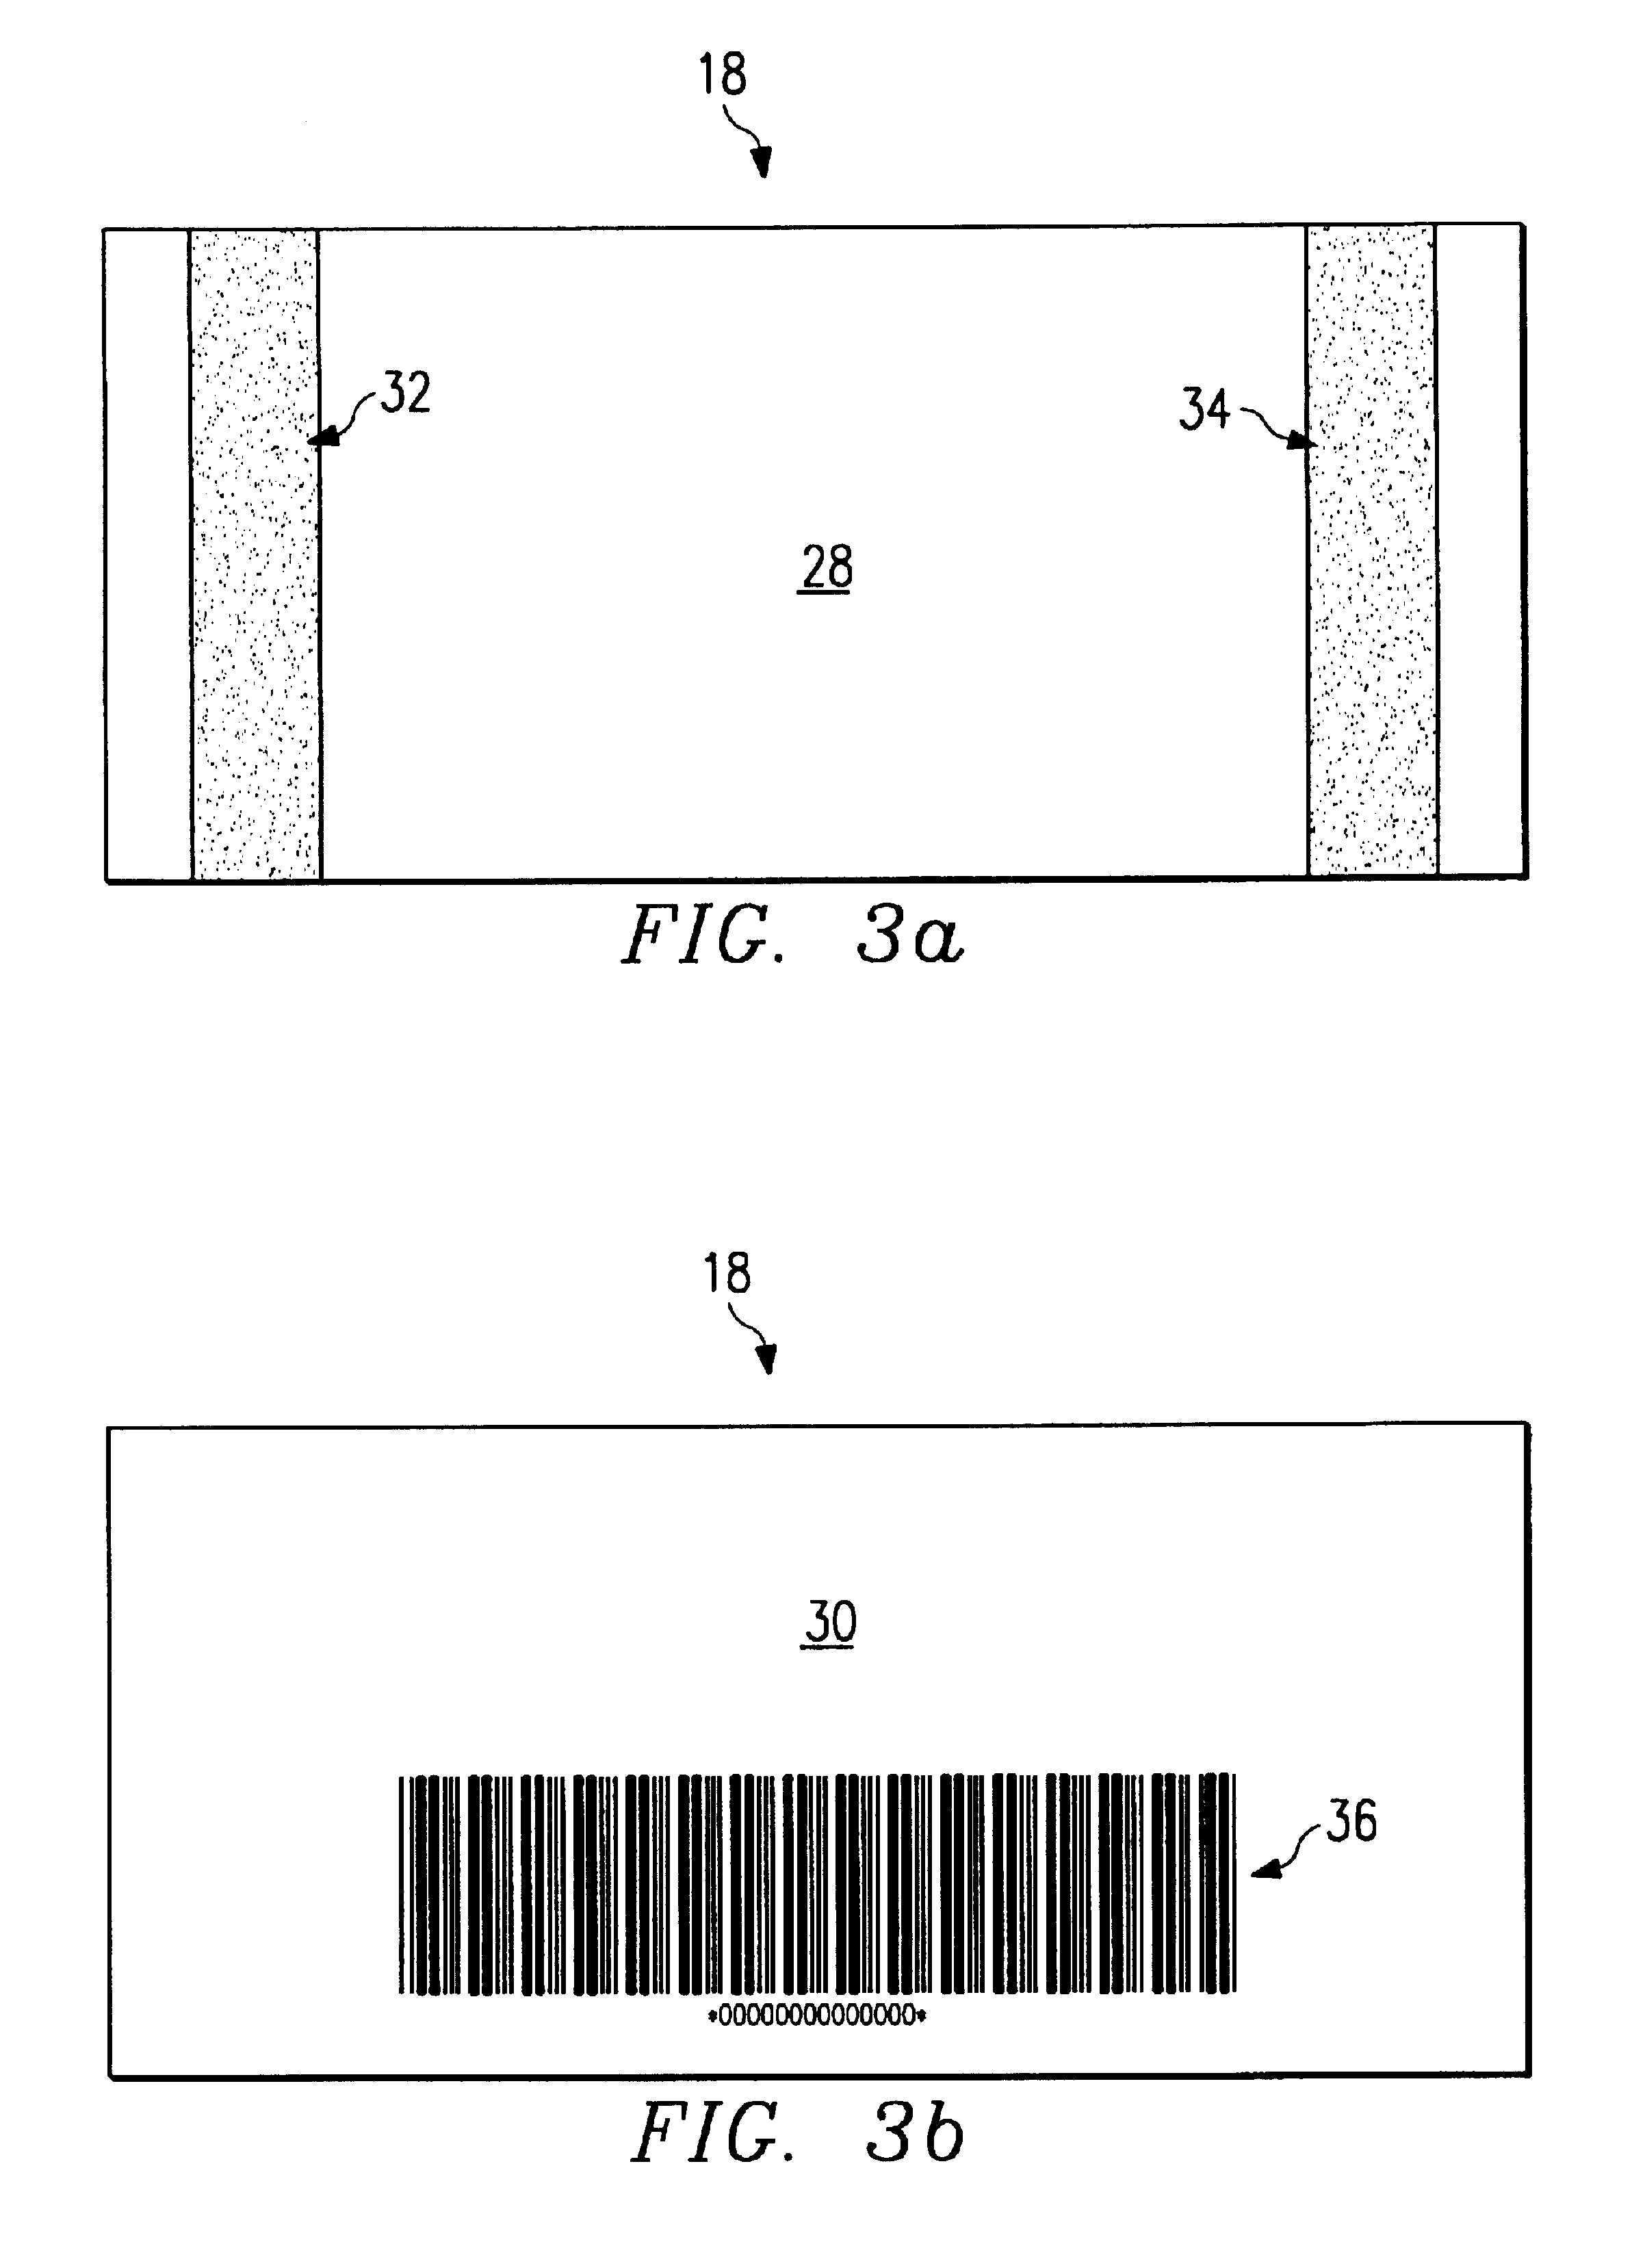 Method for semi-continuous currency processing using separator cards